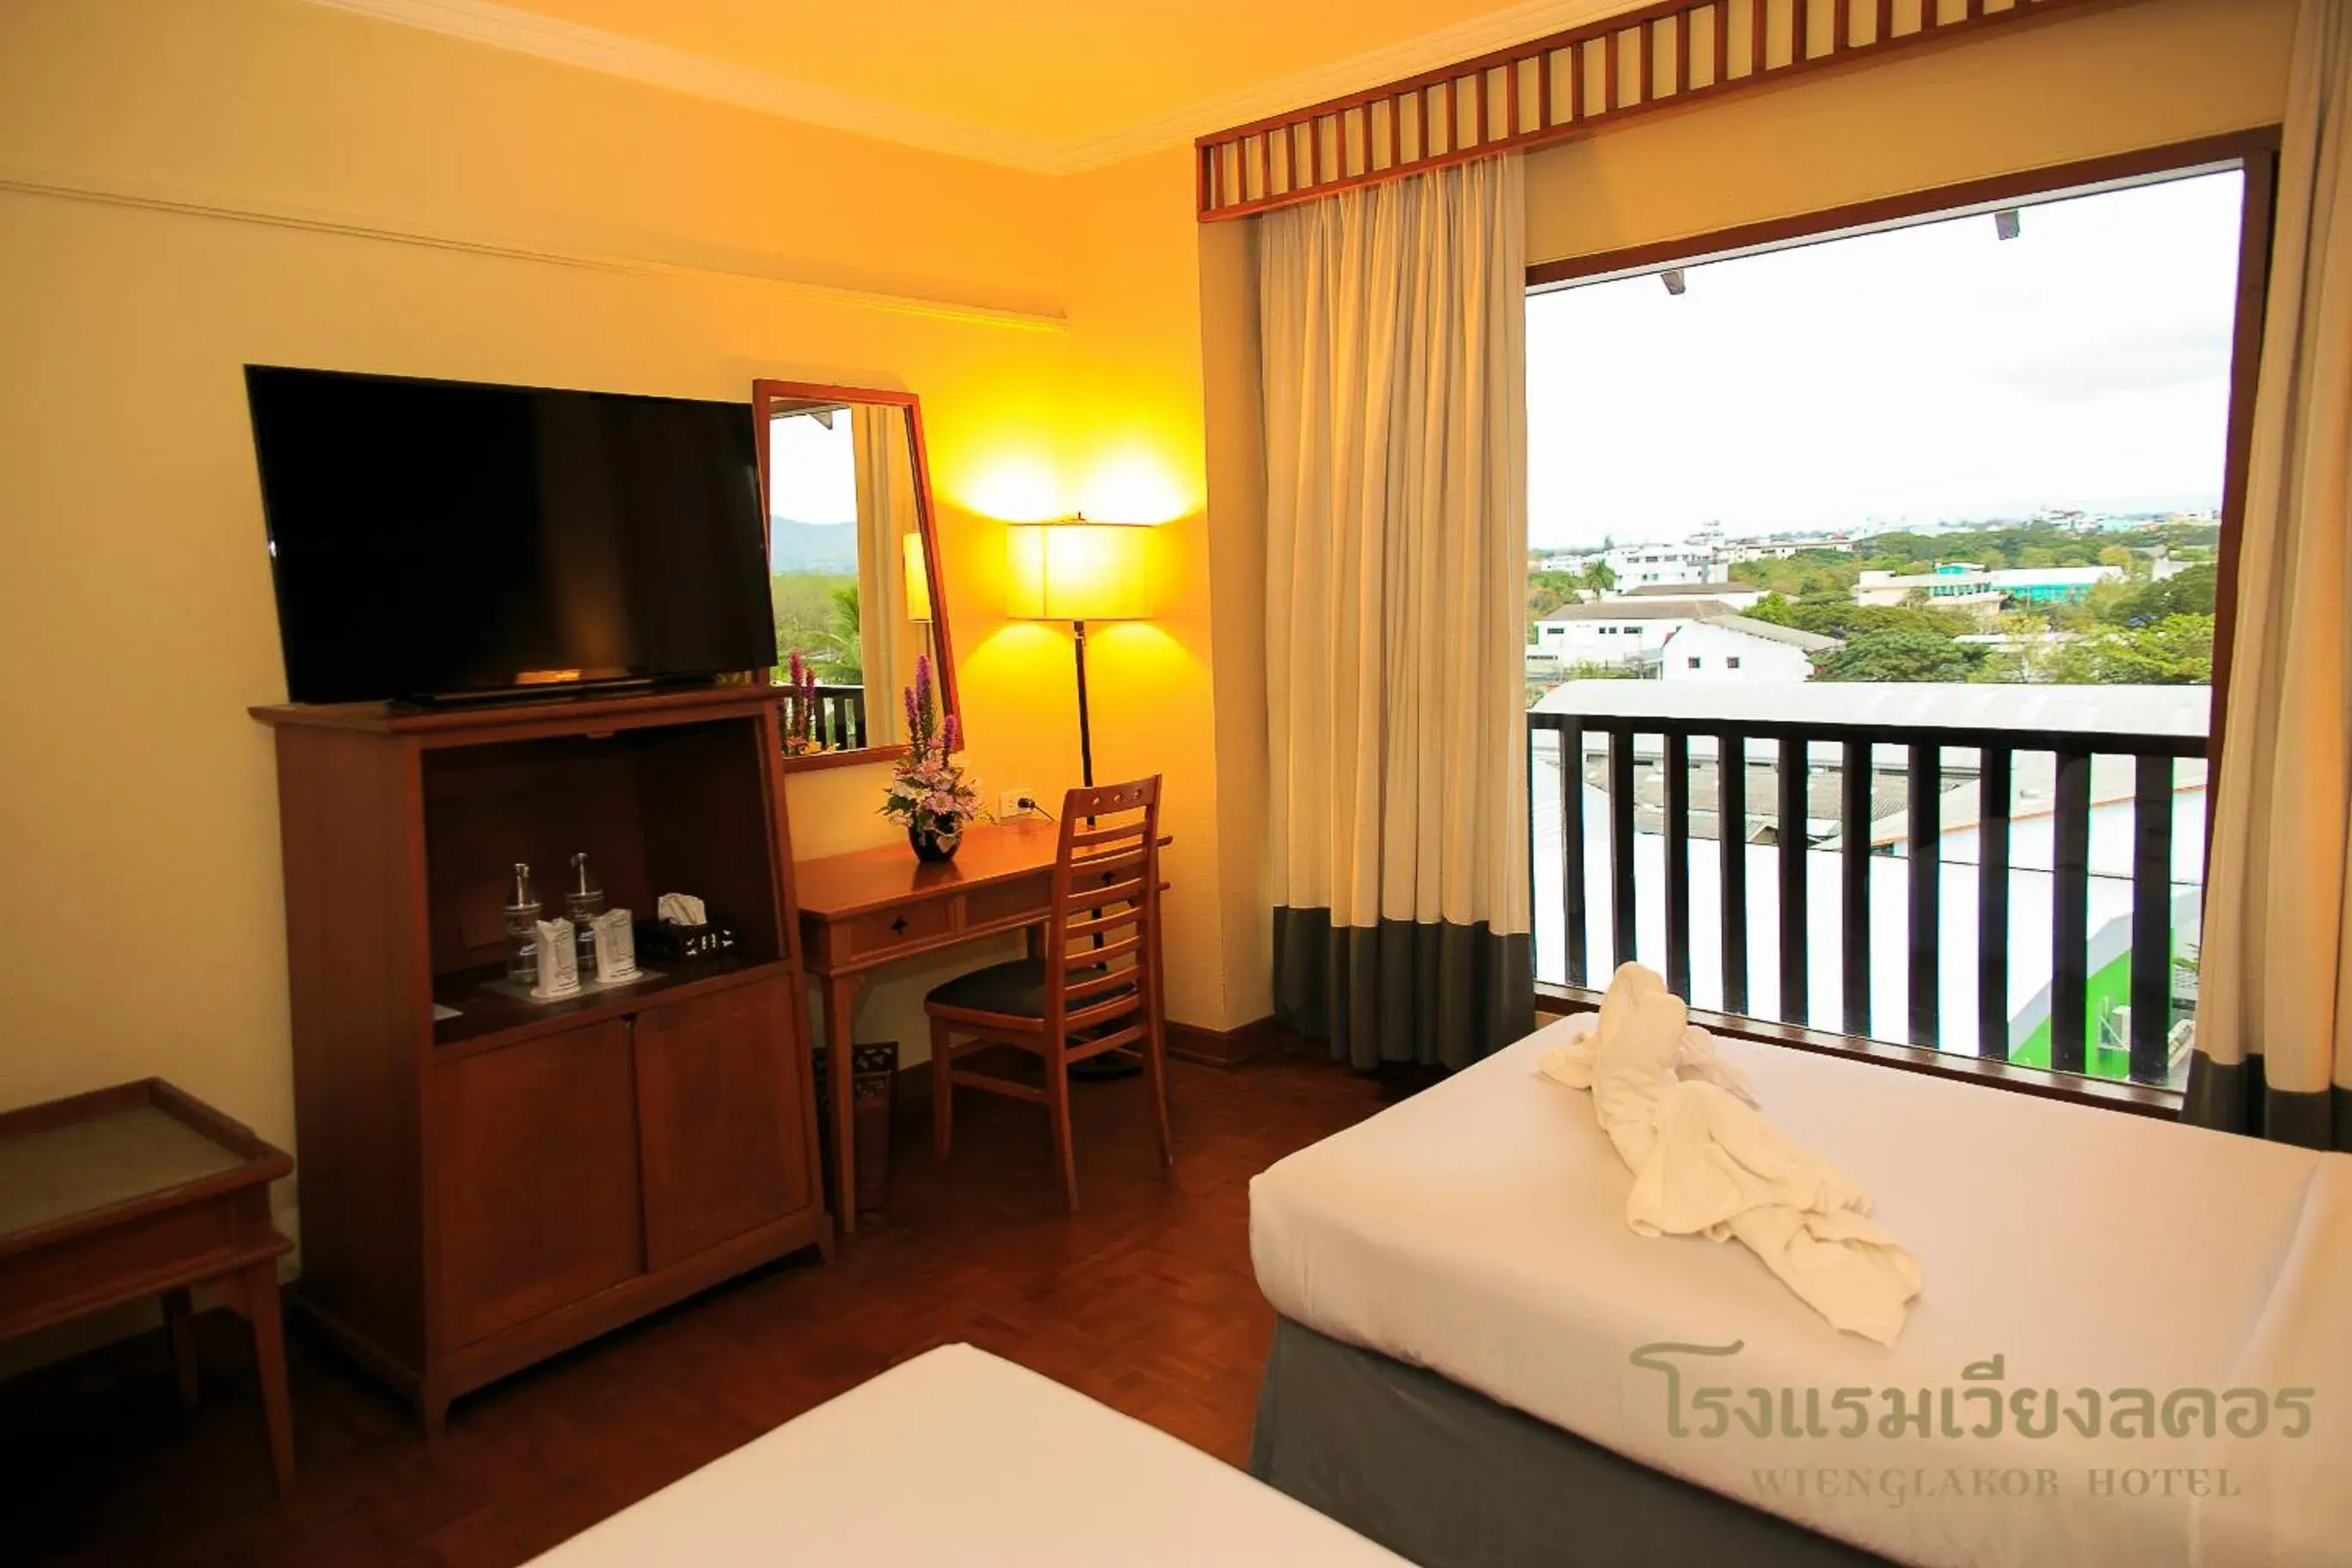 View (from property/room), TV/Entertainment Center in Wienglakor Hotel (SHA Extra Plus)